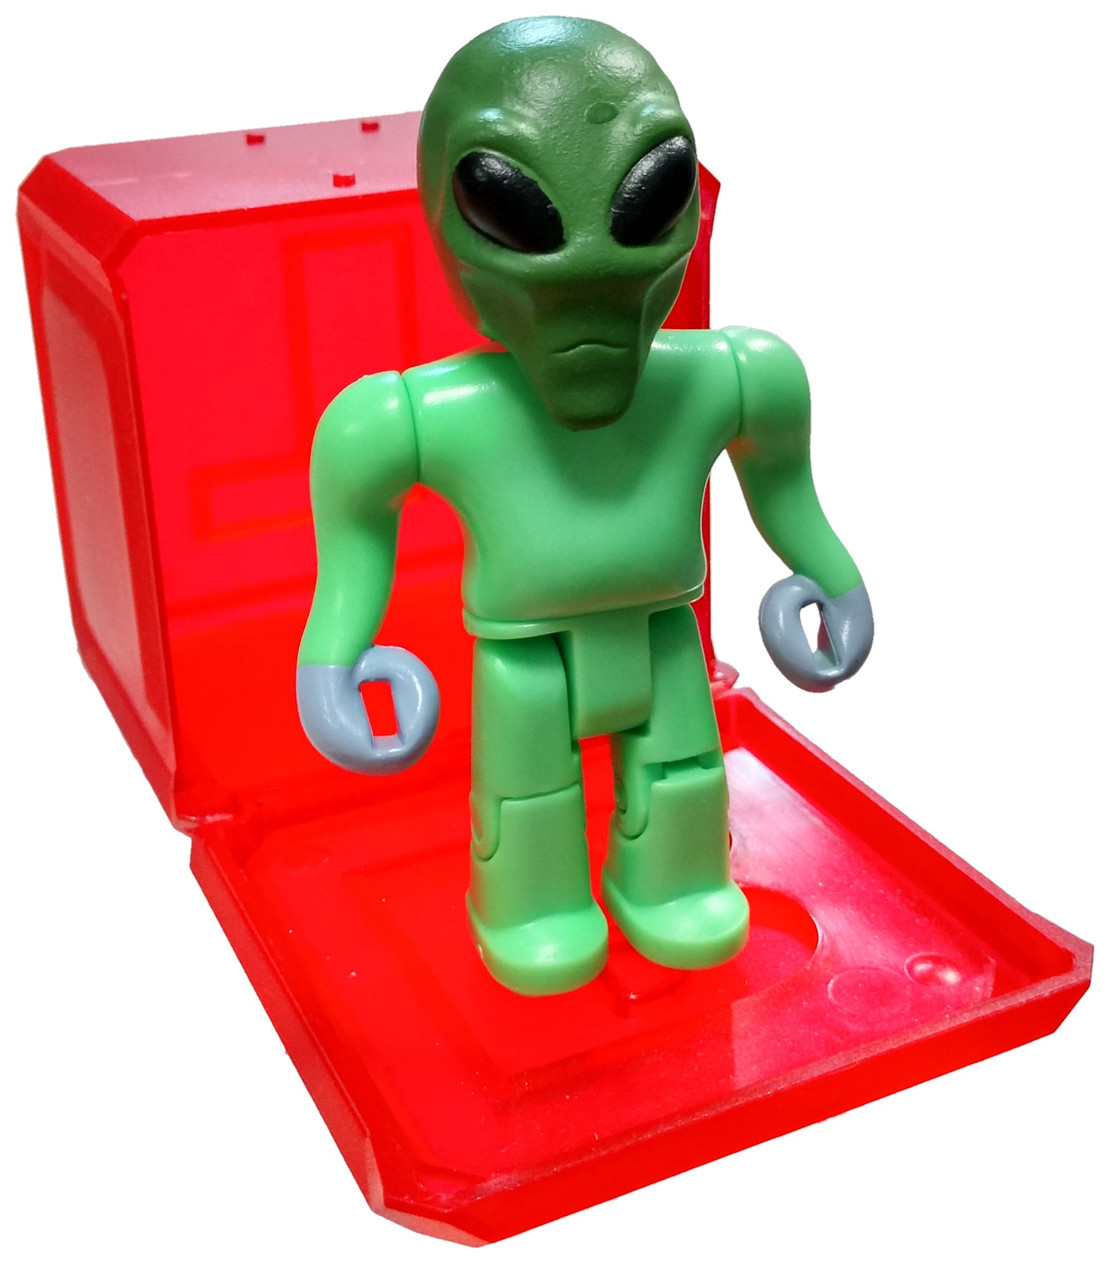 Roblox Celebrity Collection Series 5 Pinewood Alien 3 Mini Figure With Red Cube And Online Code Loose Jazwares Toywiz - yellow club alien t shirt roblox